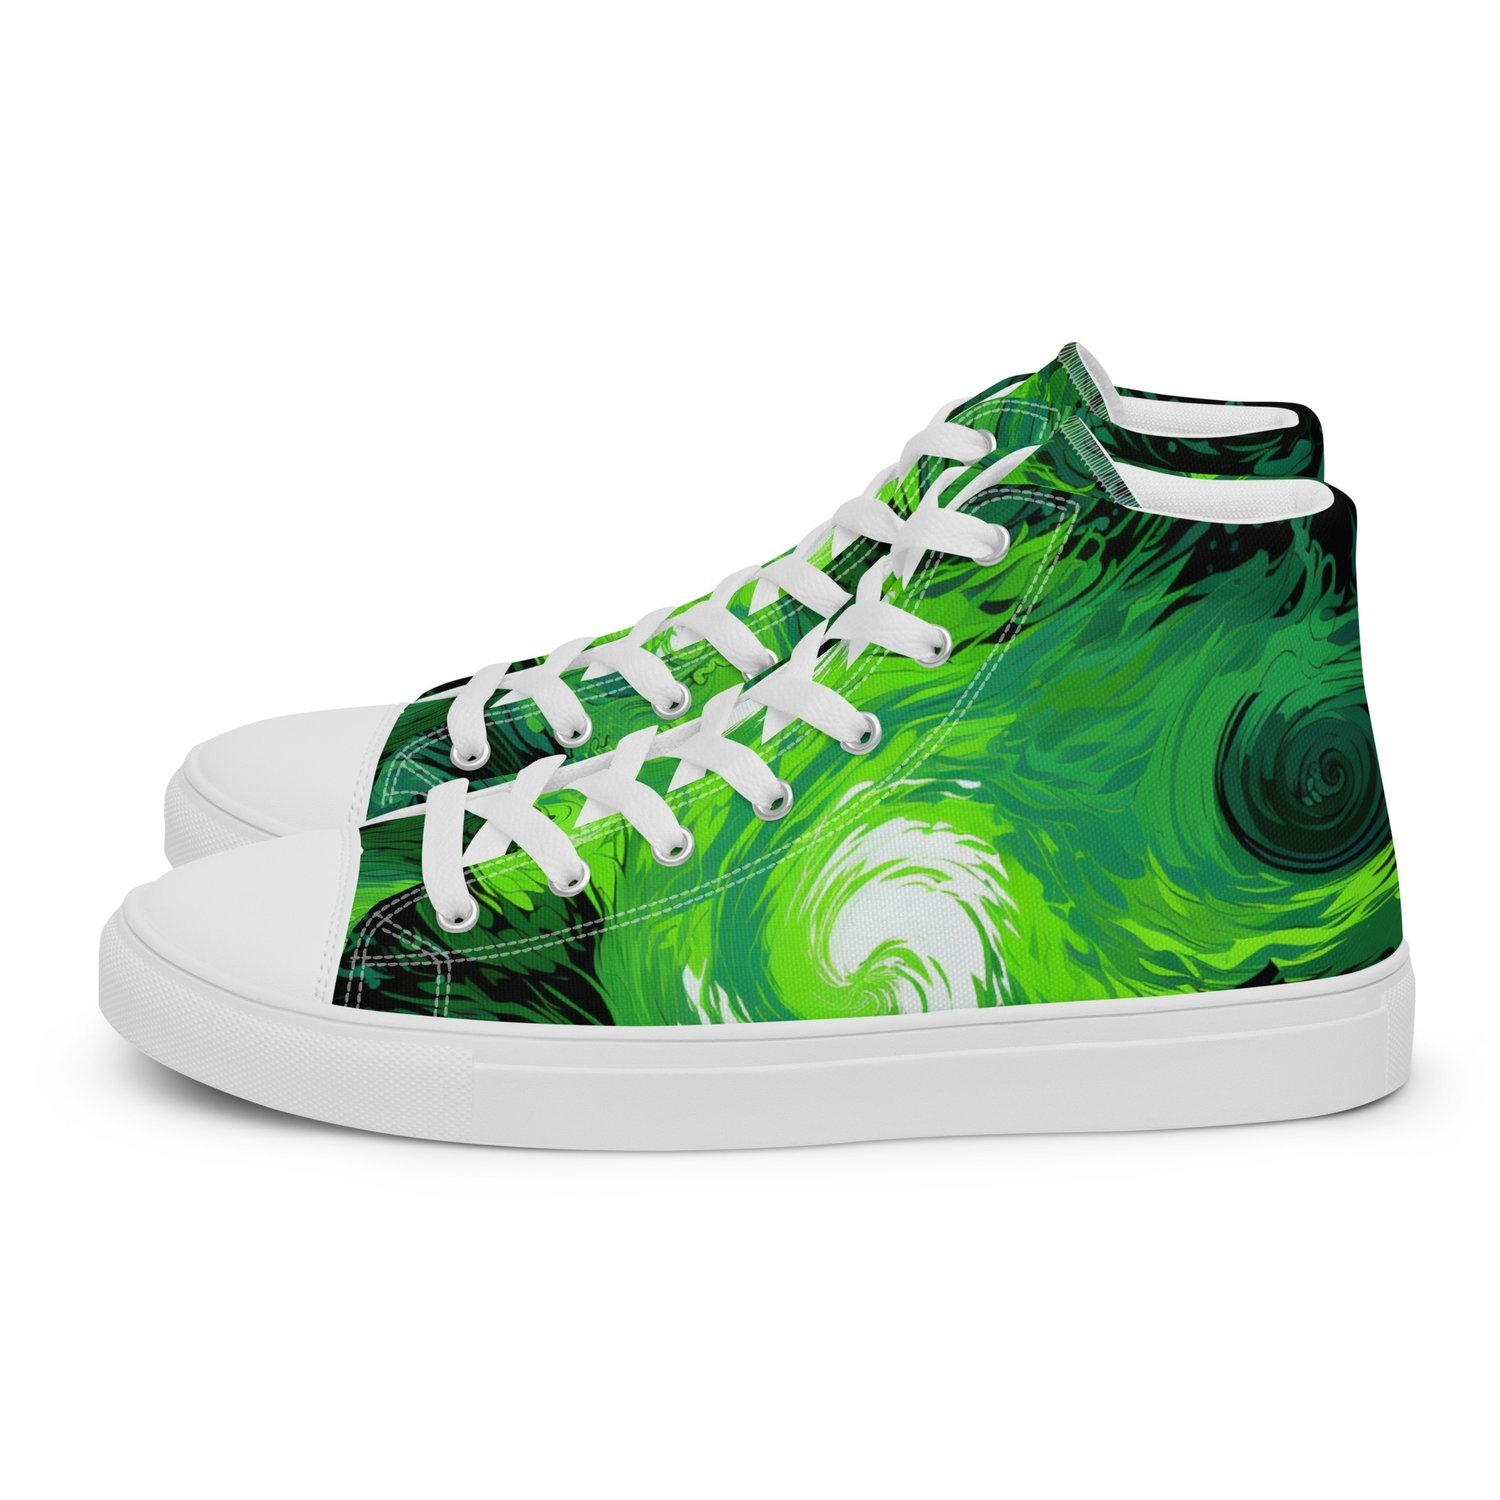 mens-high-top-canvas-shoes-white-left-6551583b763bf.jpg